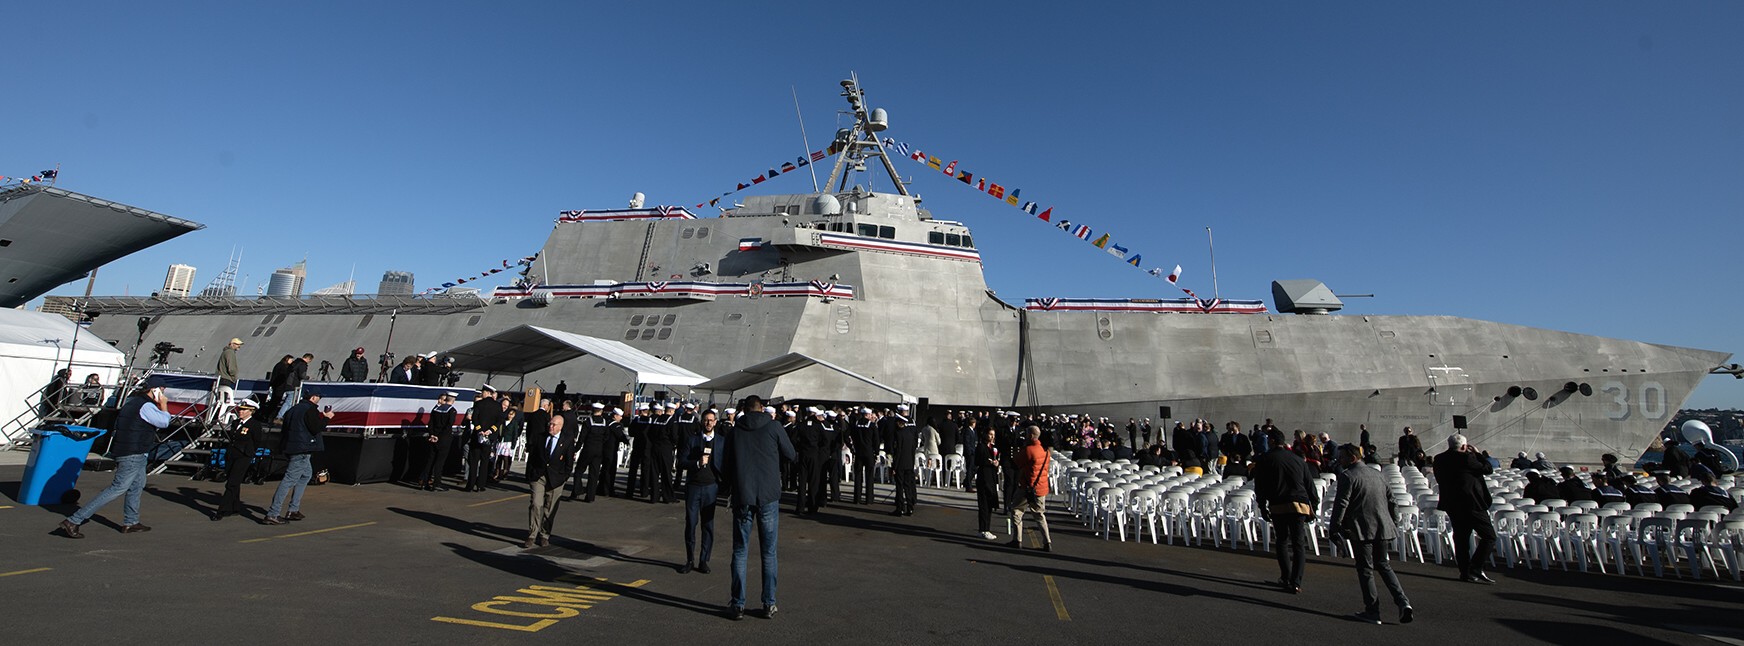 lcs-30 uss canberra littoral combat ship independence class us navy commissioning ceremony sydney australia 14